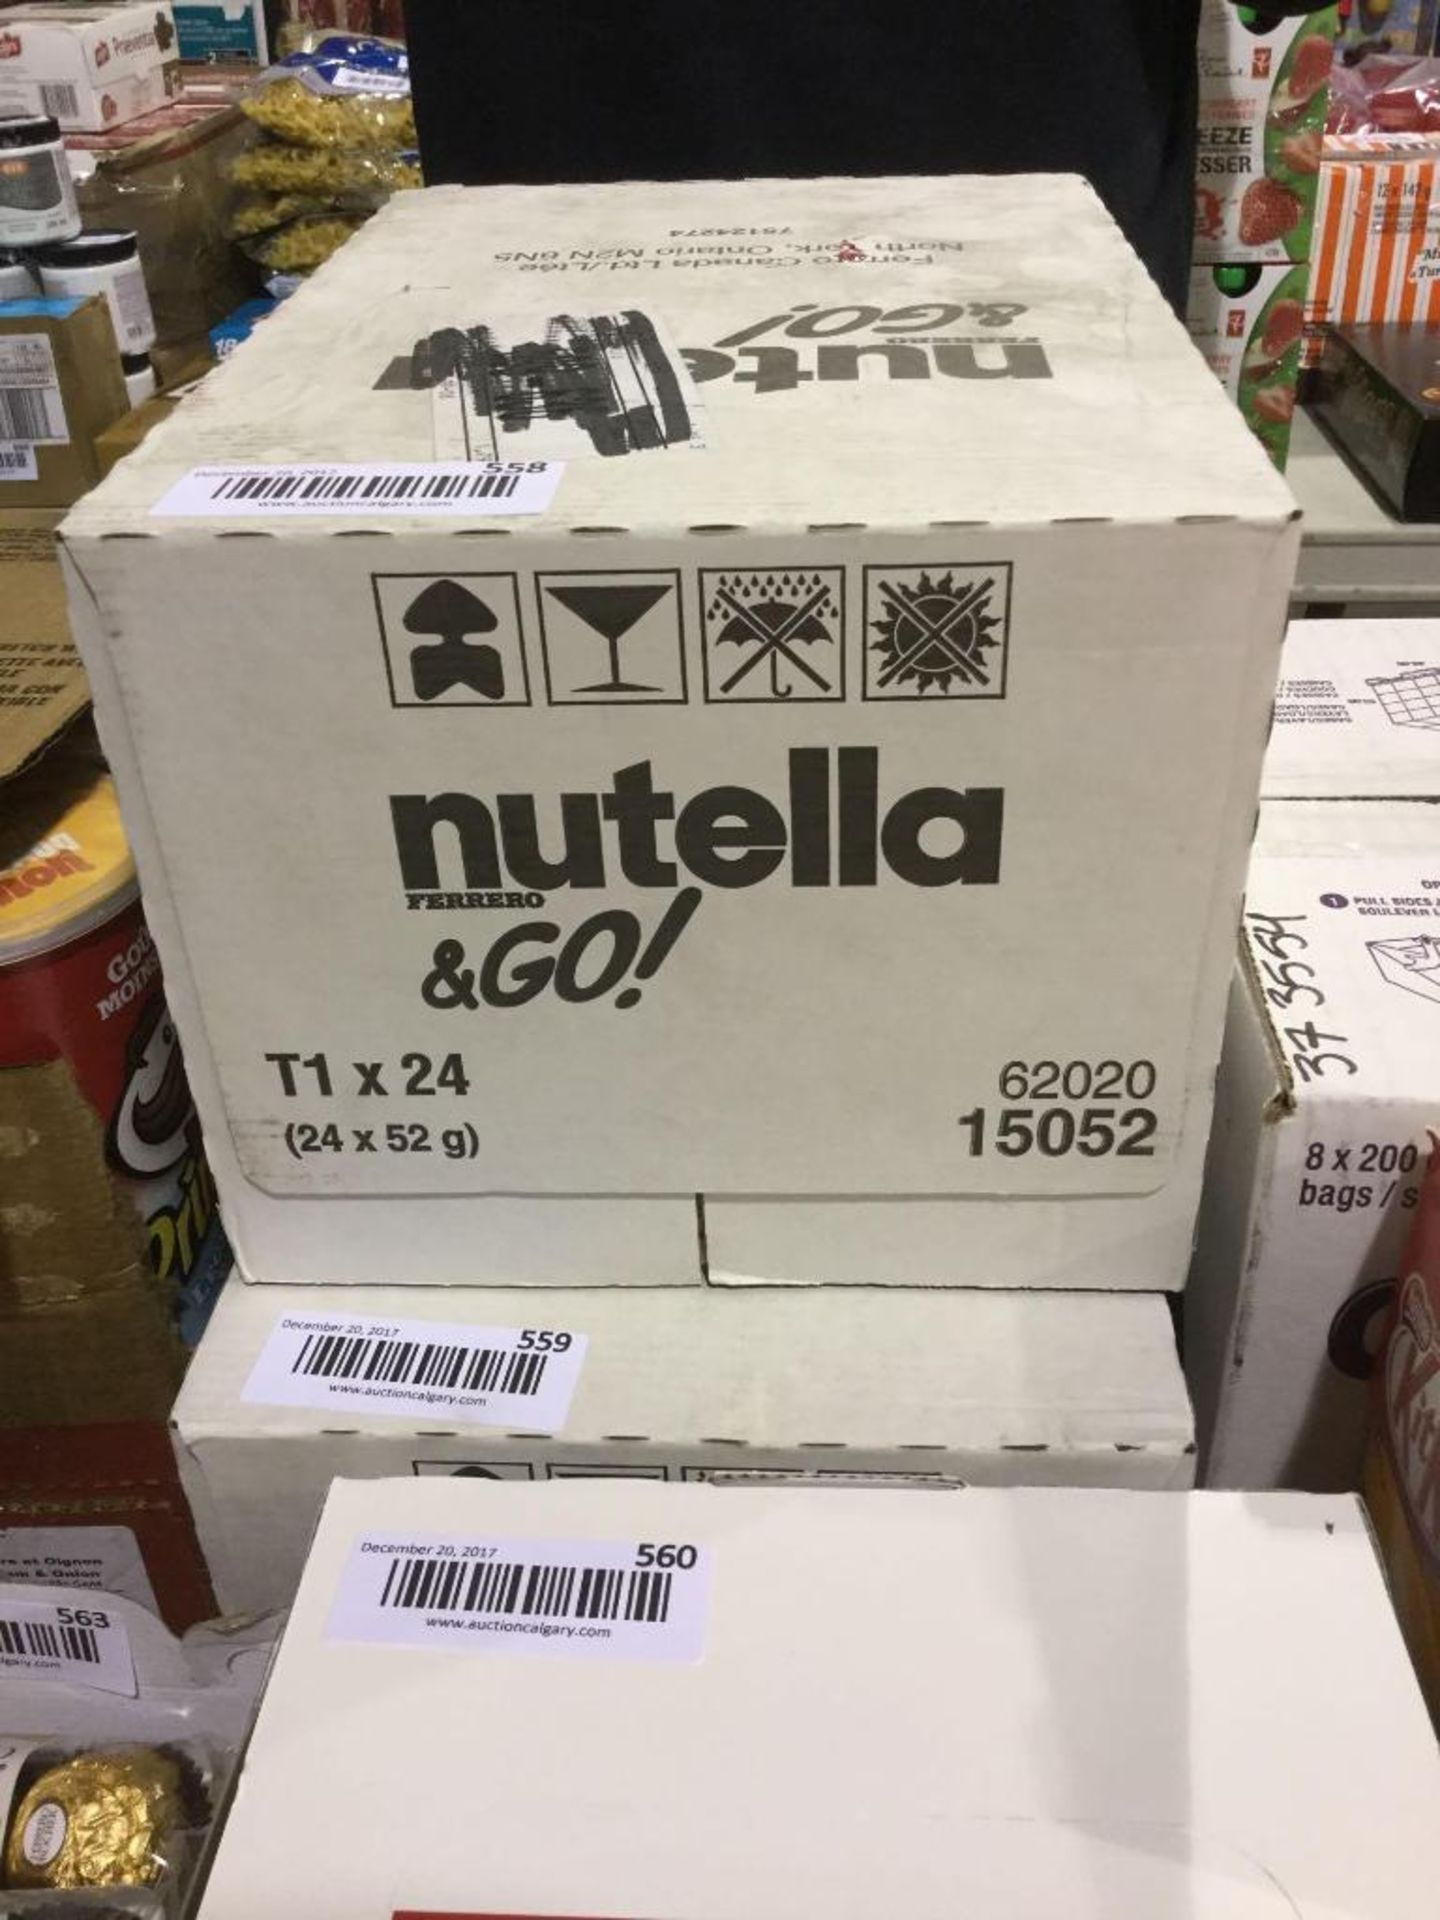 Case of 24 x 52 g Nutella to go